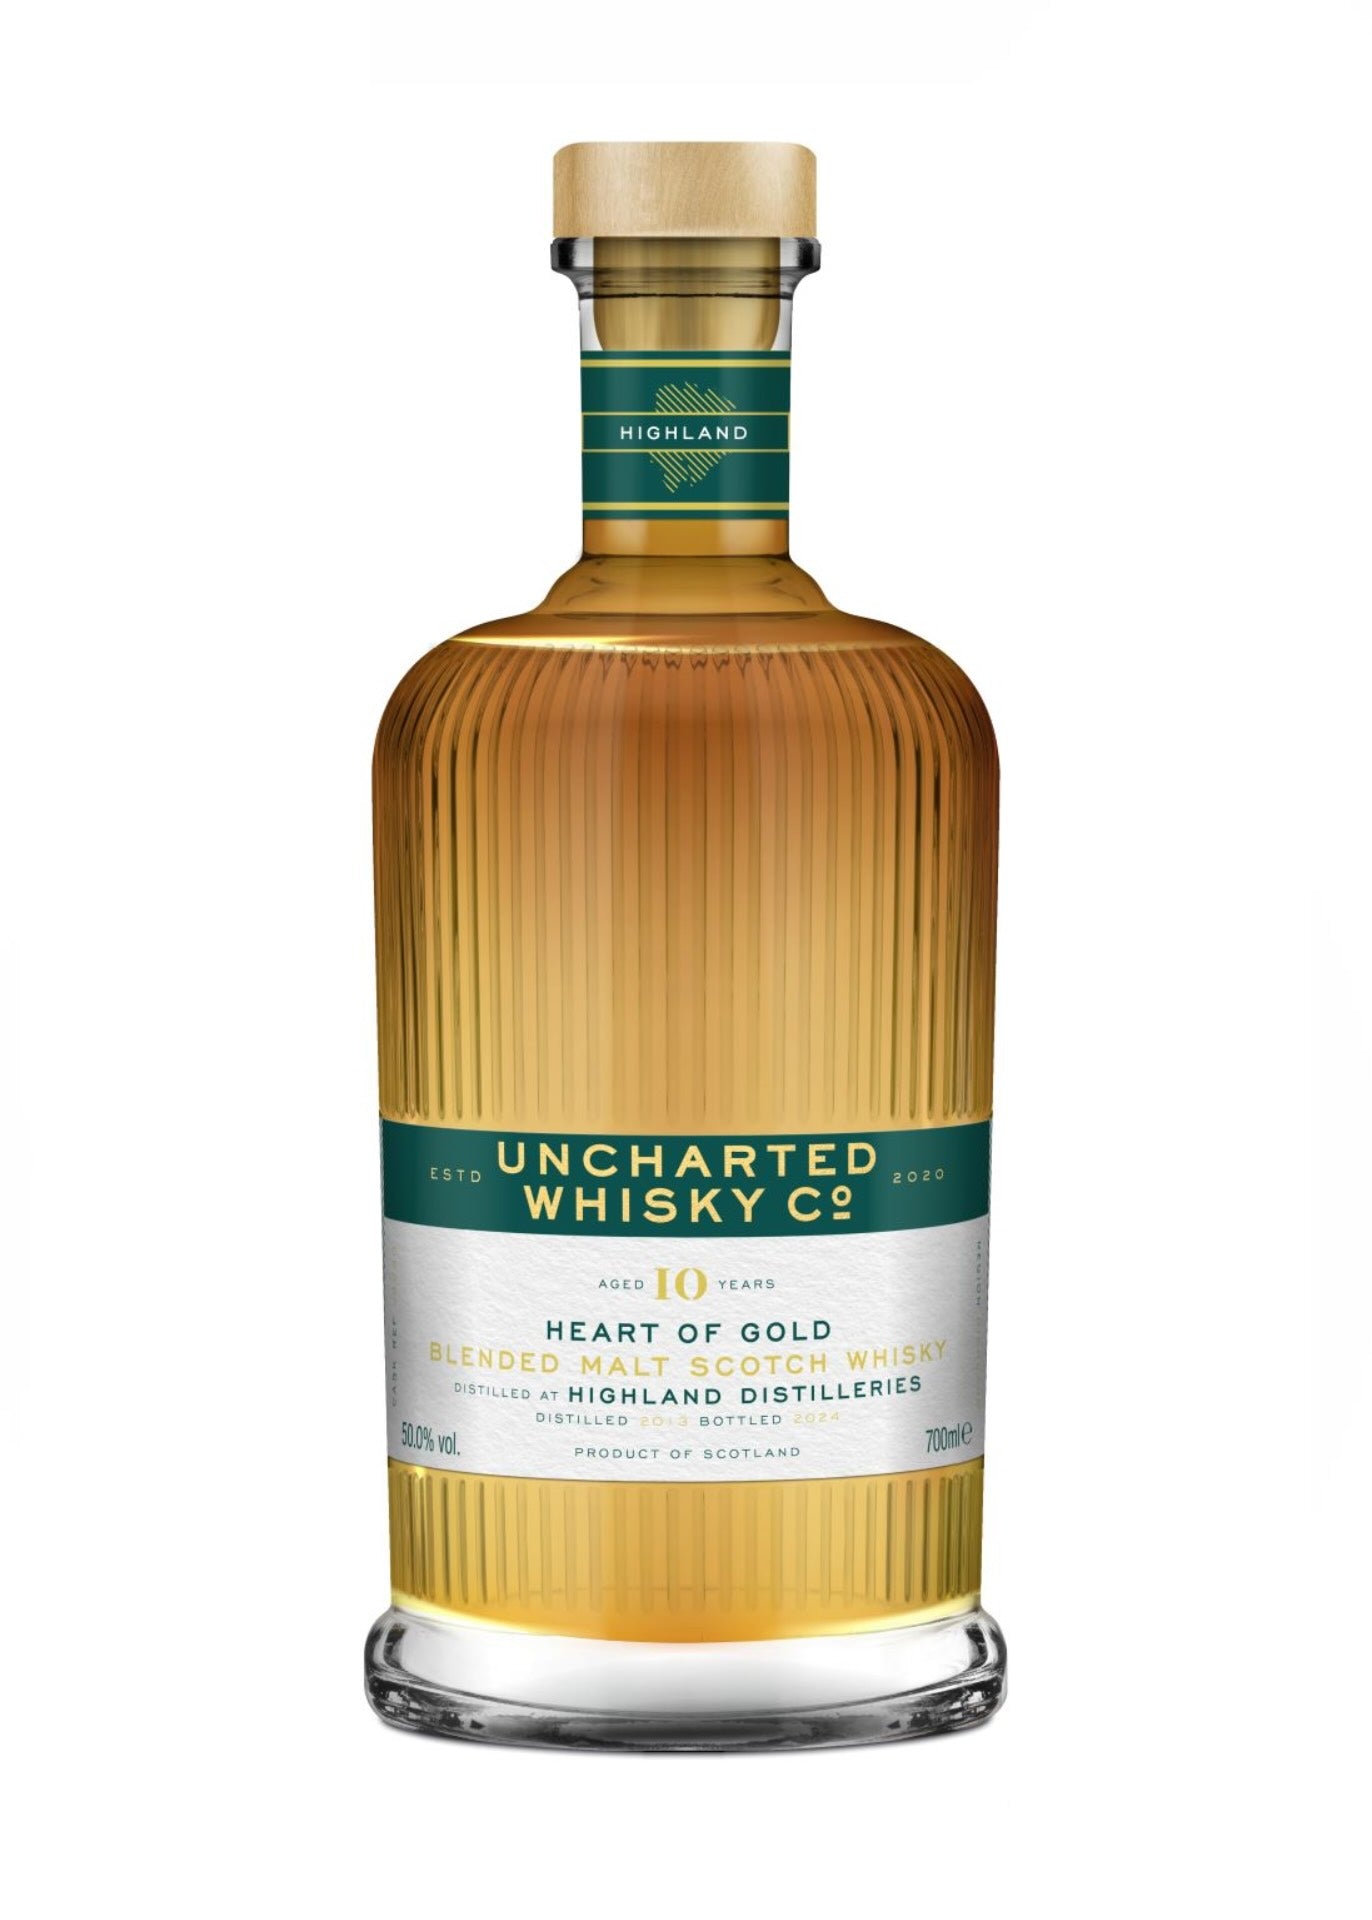 Uncharted Whisky, Heart Of Gold, Highland Blended Malt 10 Year Old